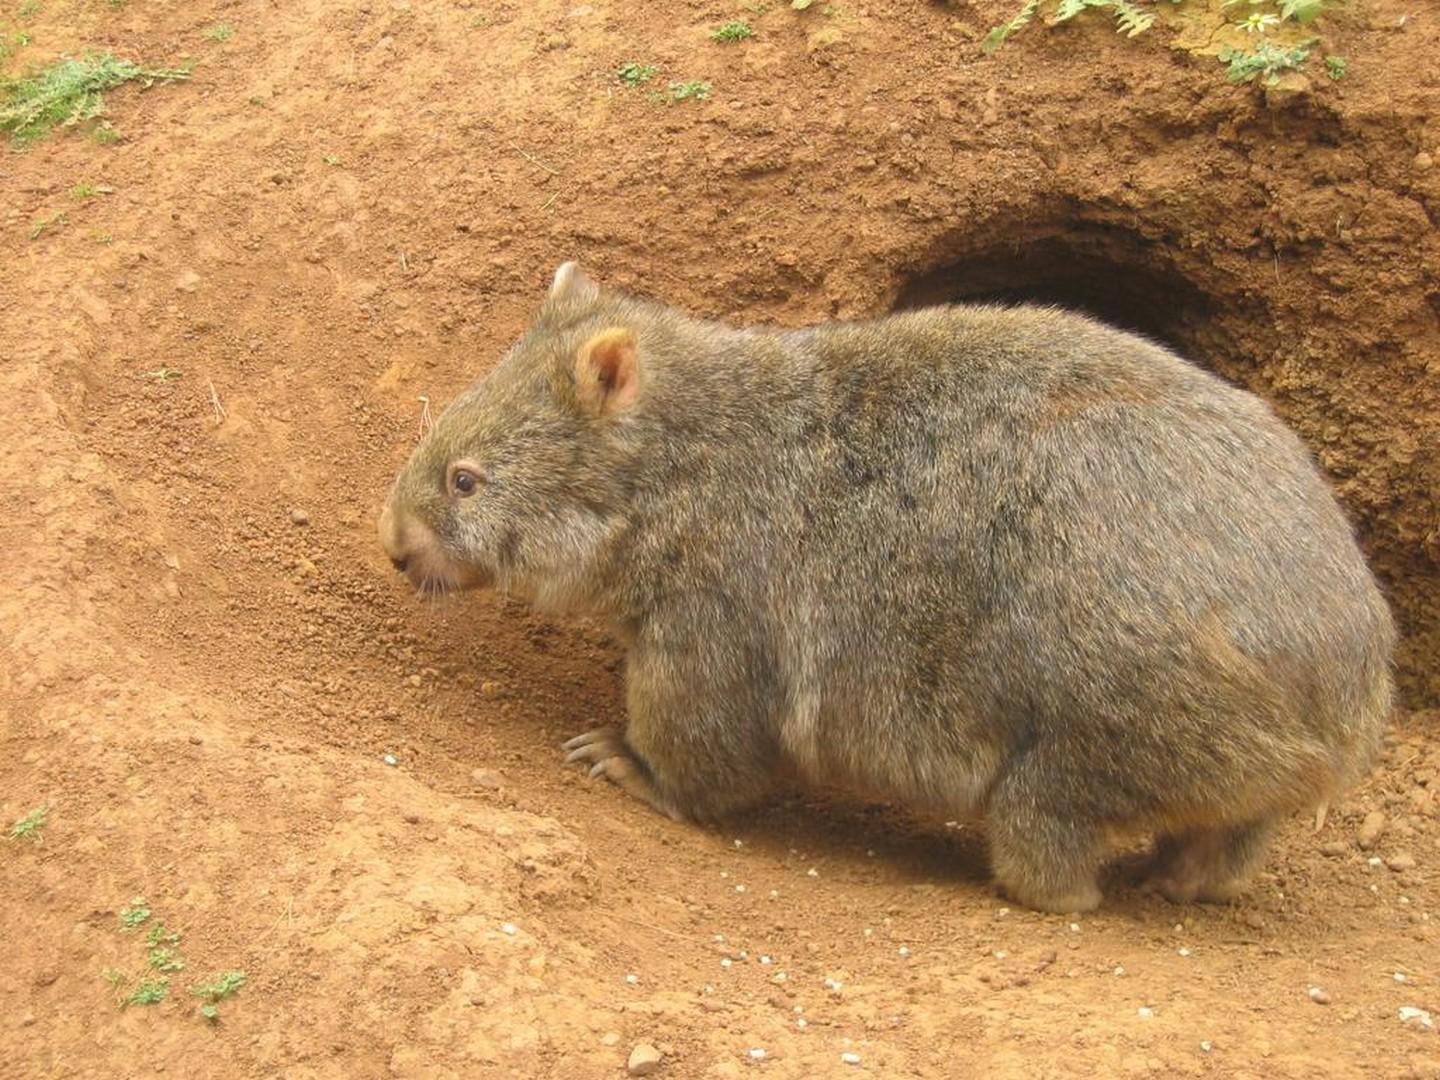 Wombat at the burrow